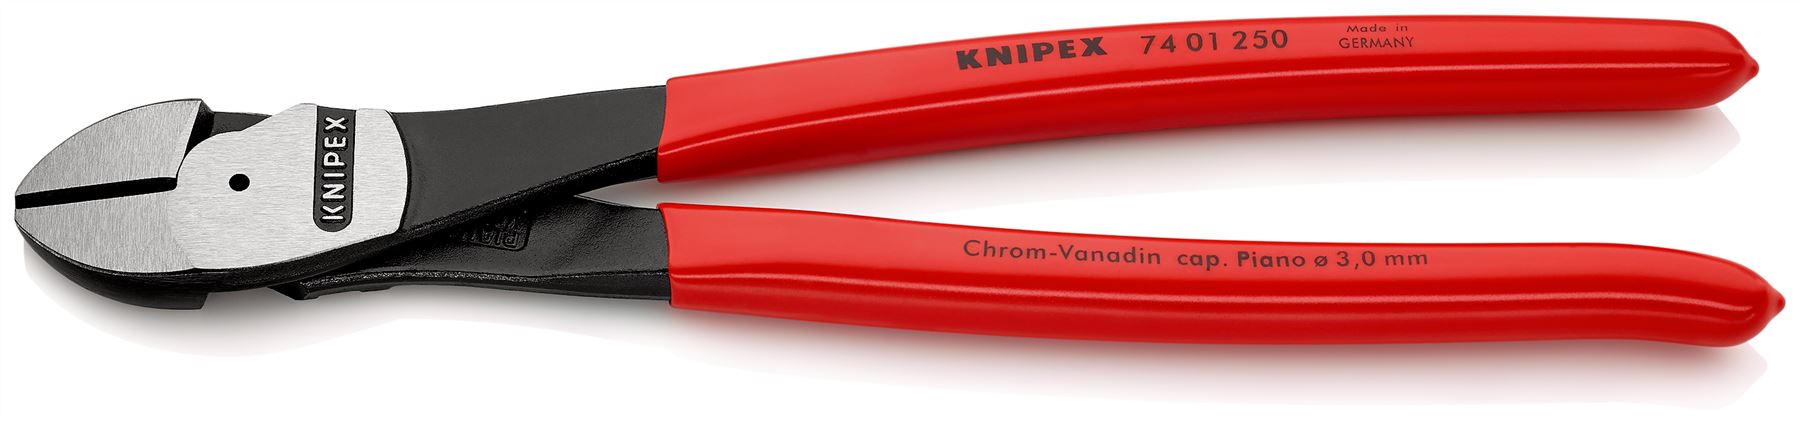 KNIPEX Diagonal Cutting Pliers High Leverage Side Cutters 250mm Plastic Coated Handles 74 01 250 SB